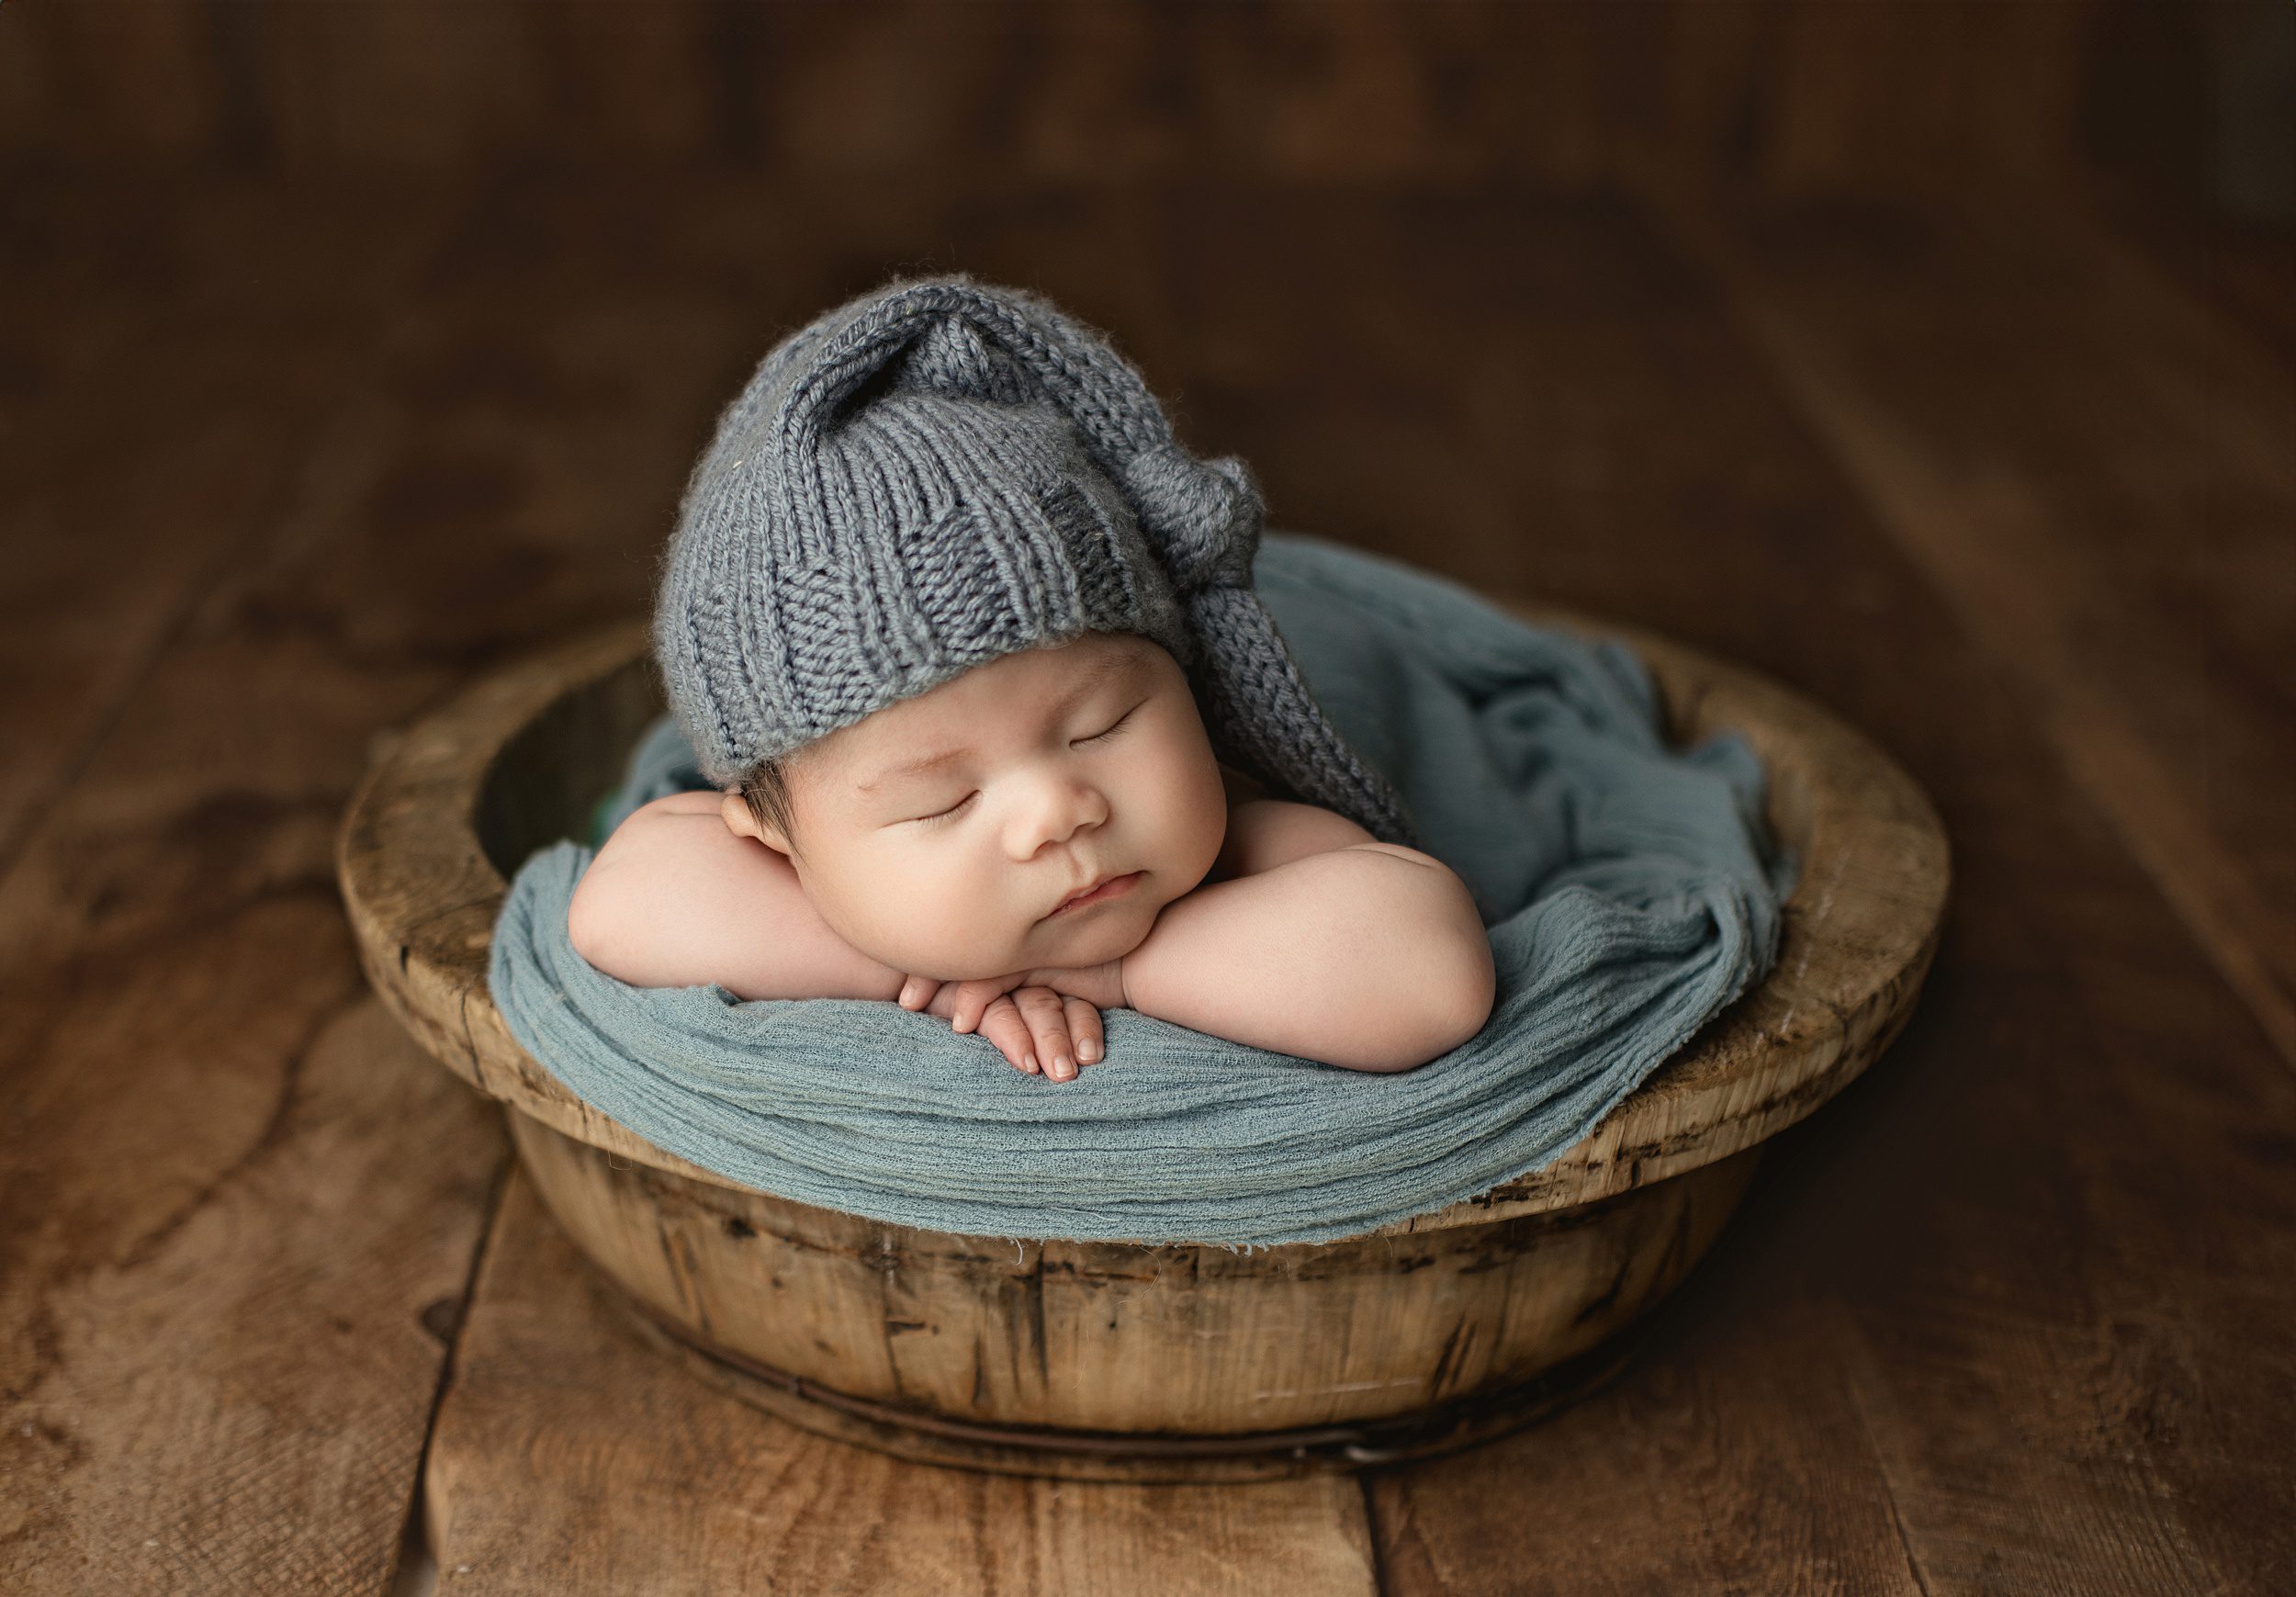 A newborn baby sleeps in a wooden bowl on a wood floor in a studio